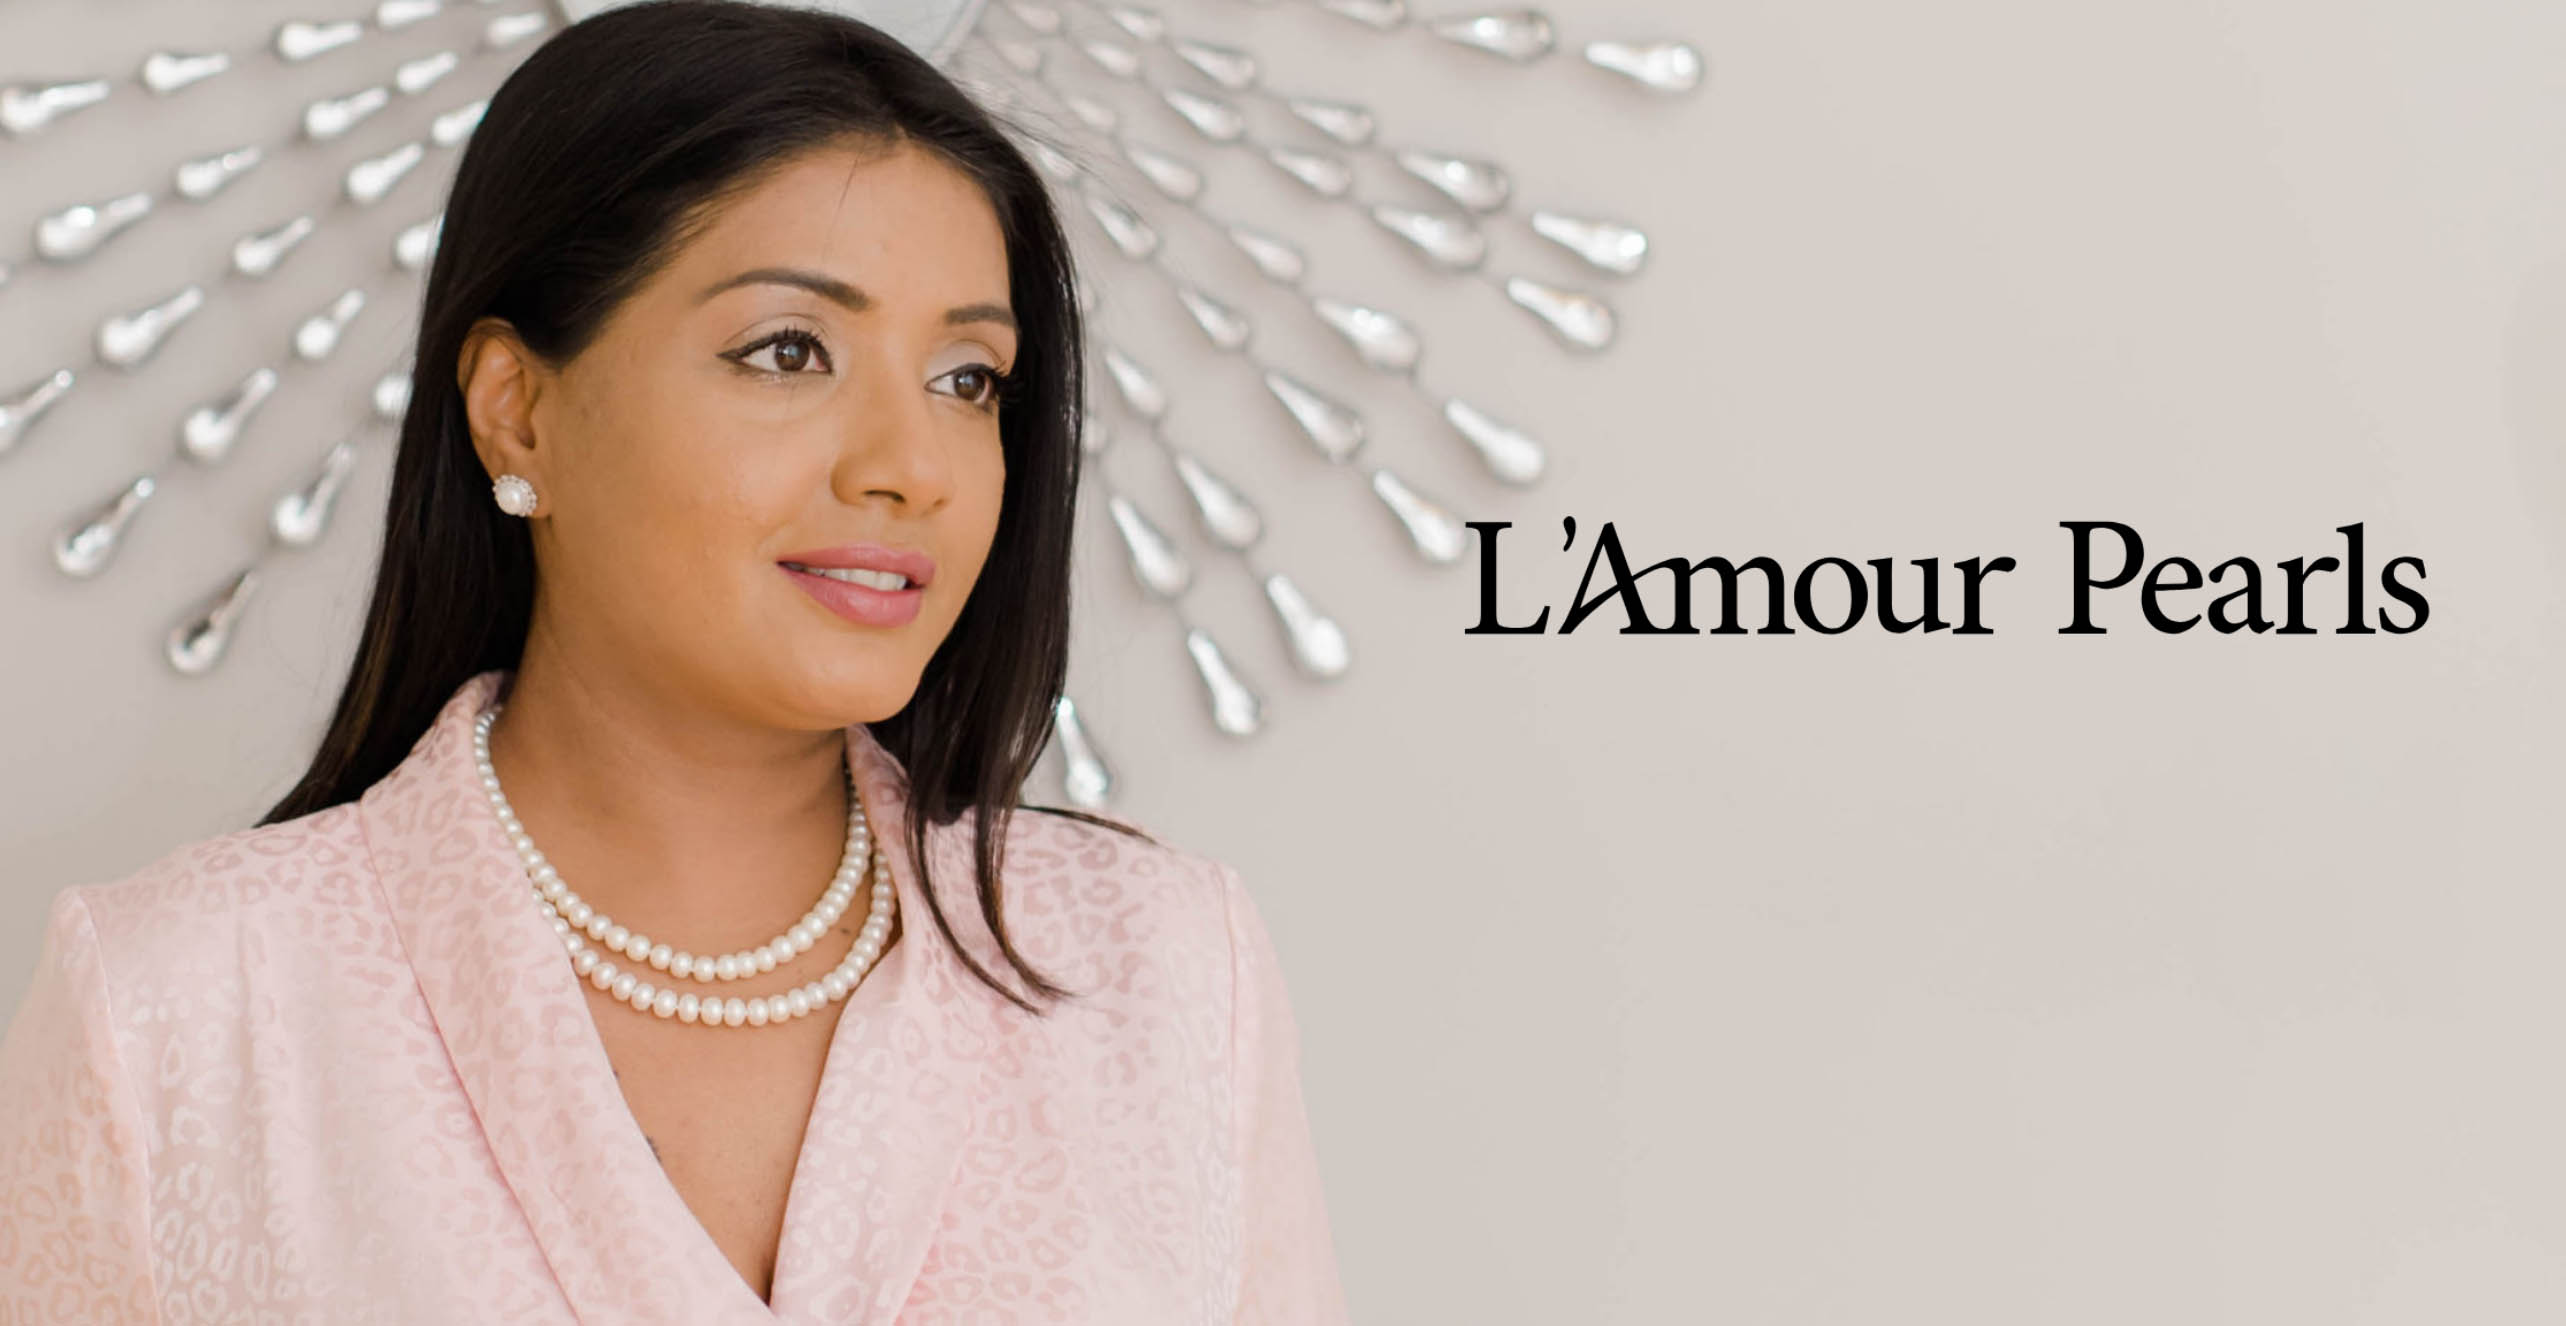 The L’Amour Pearls collection